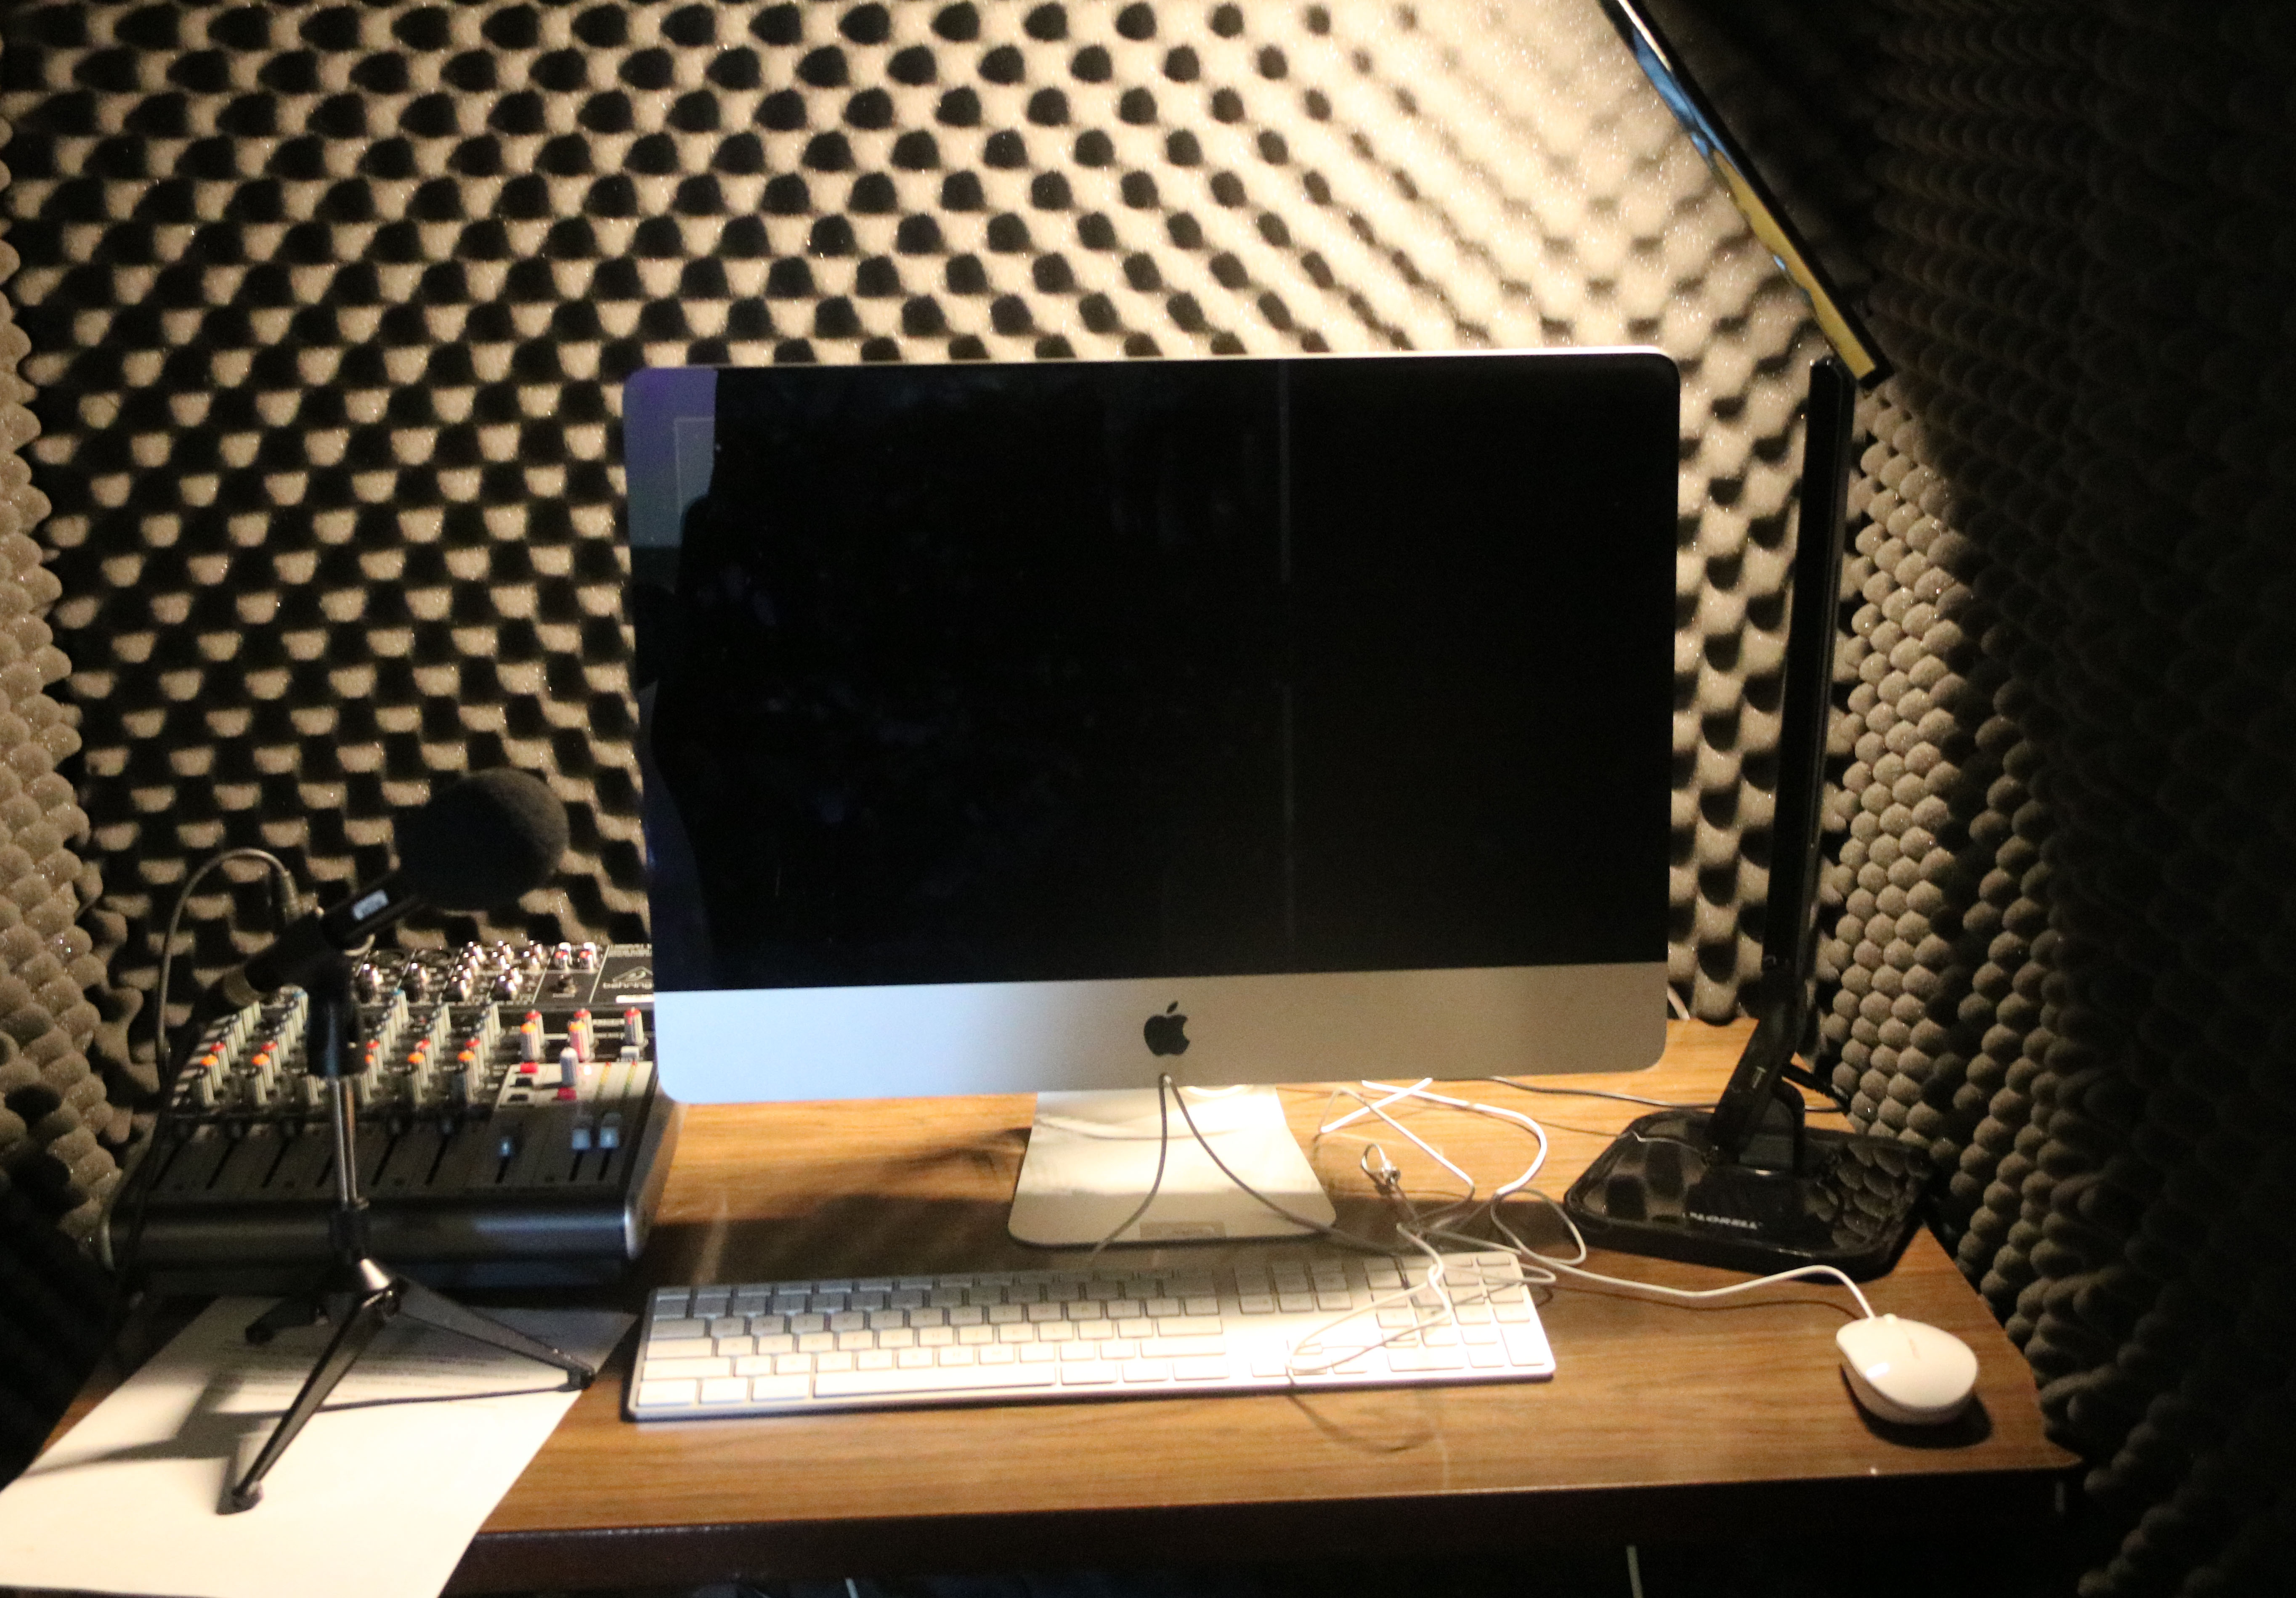 Studio 313 is located on the third floor of Andersen Hall. The SoundBooth (pictured) is located on the 2nd floor of Andersen Hall, behind the newsroom.